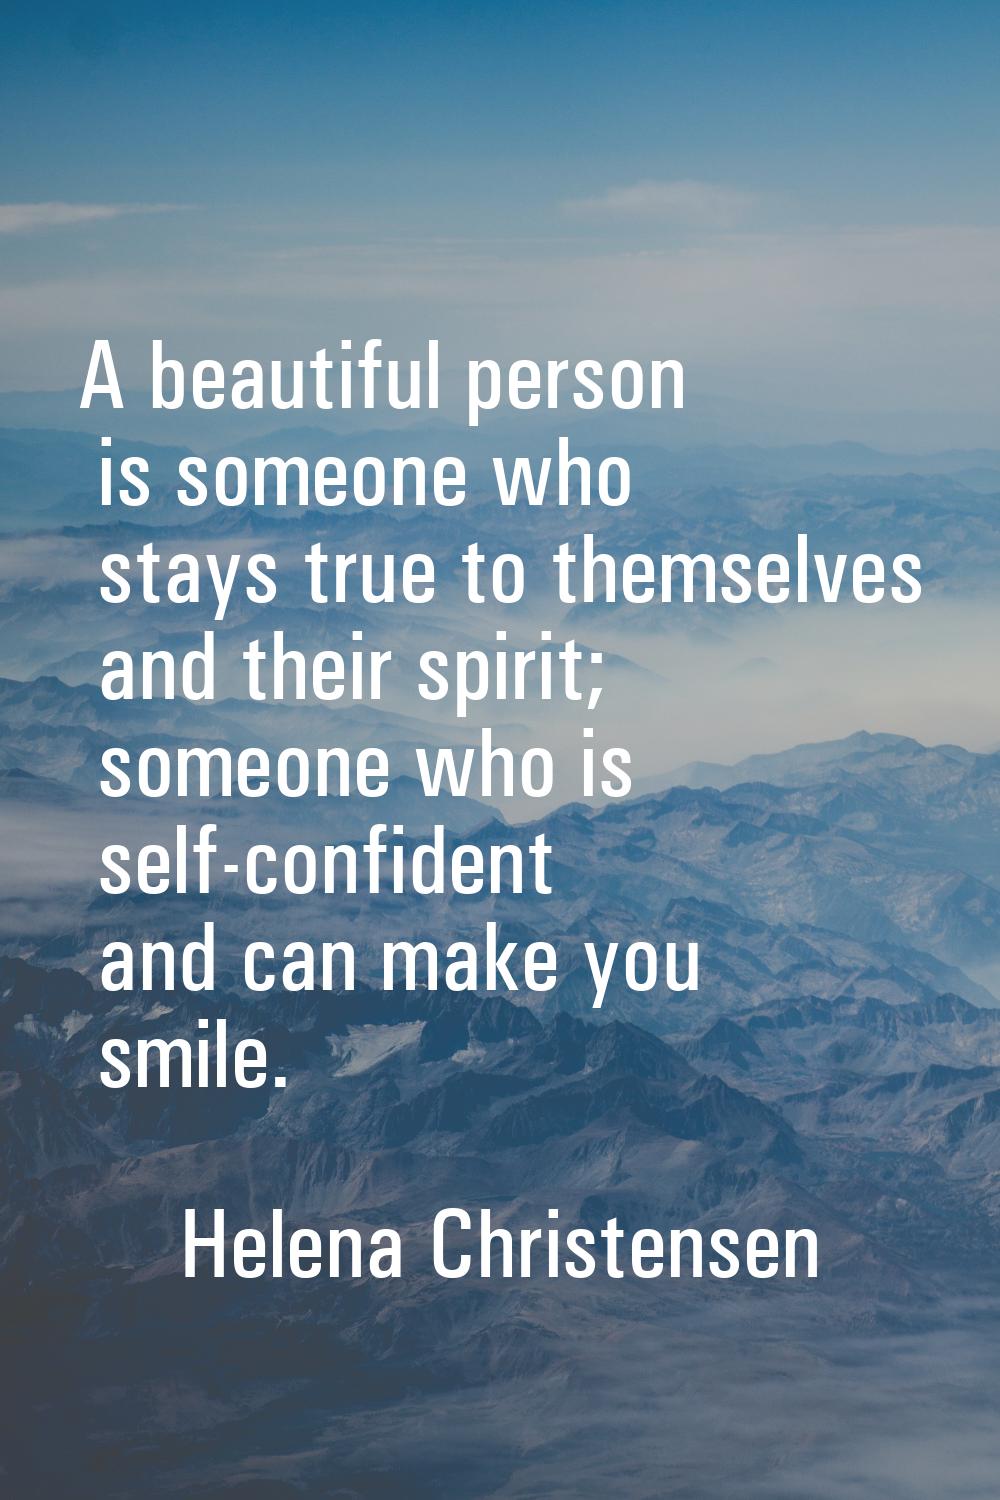 A beautiful person is someone who stays true to themselves and their spirit; someone who is self-co